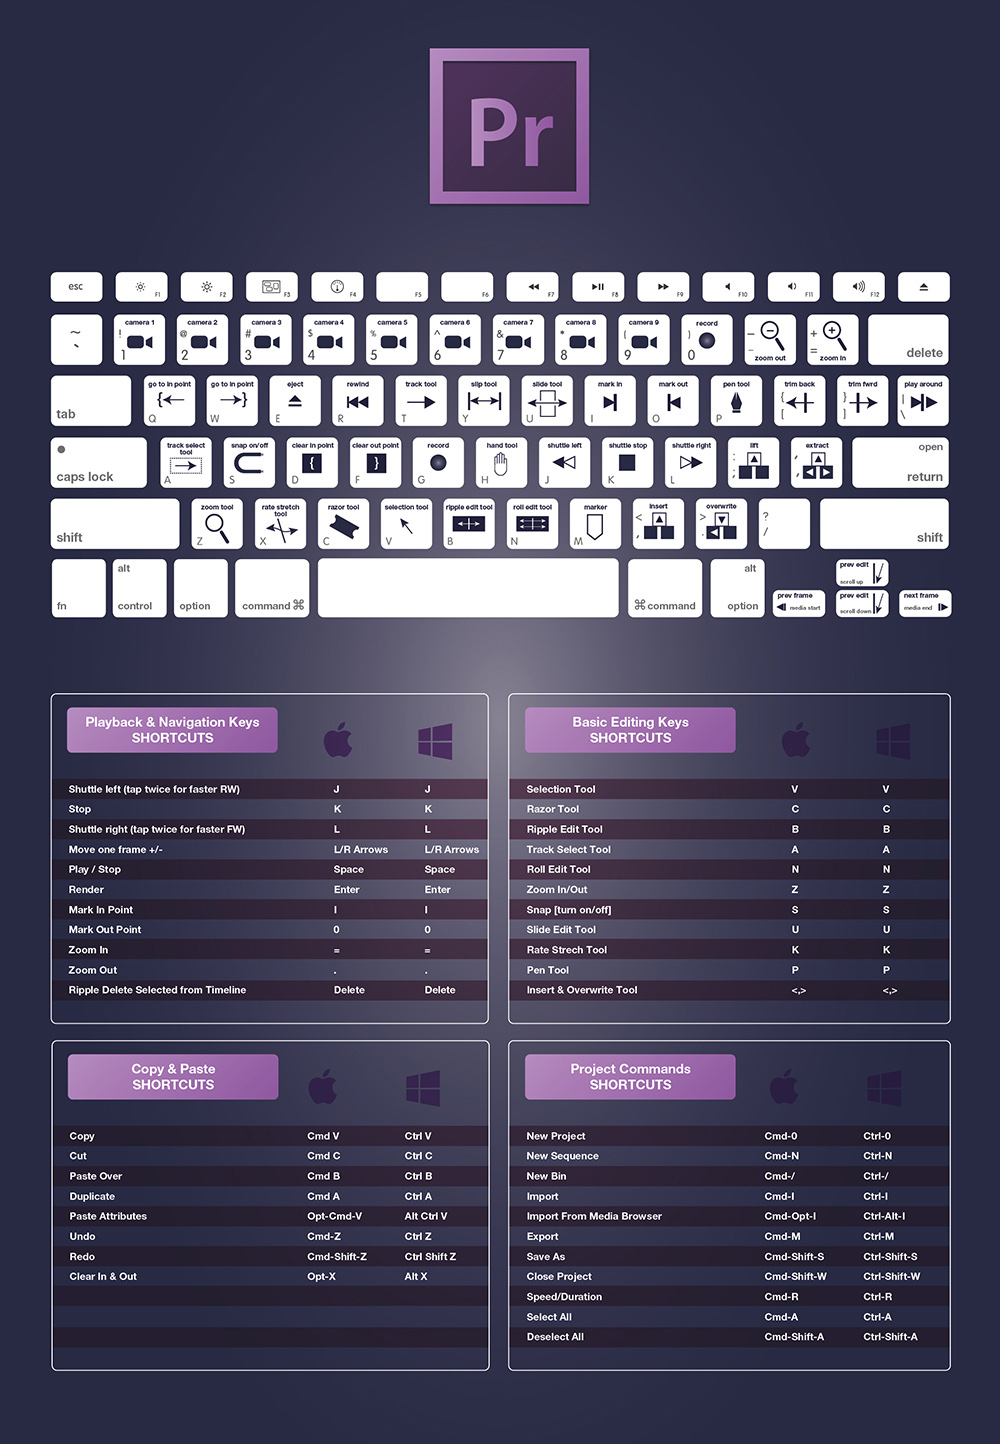 The Complete Adobe Premiere Pro CC Keyboard Shortcuts For Designers Guide 2015